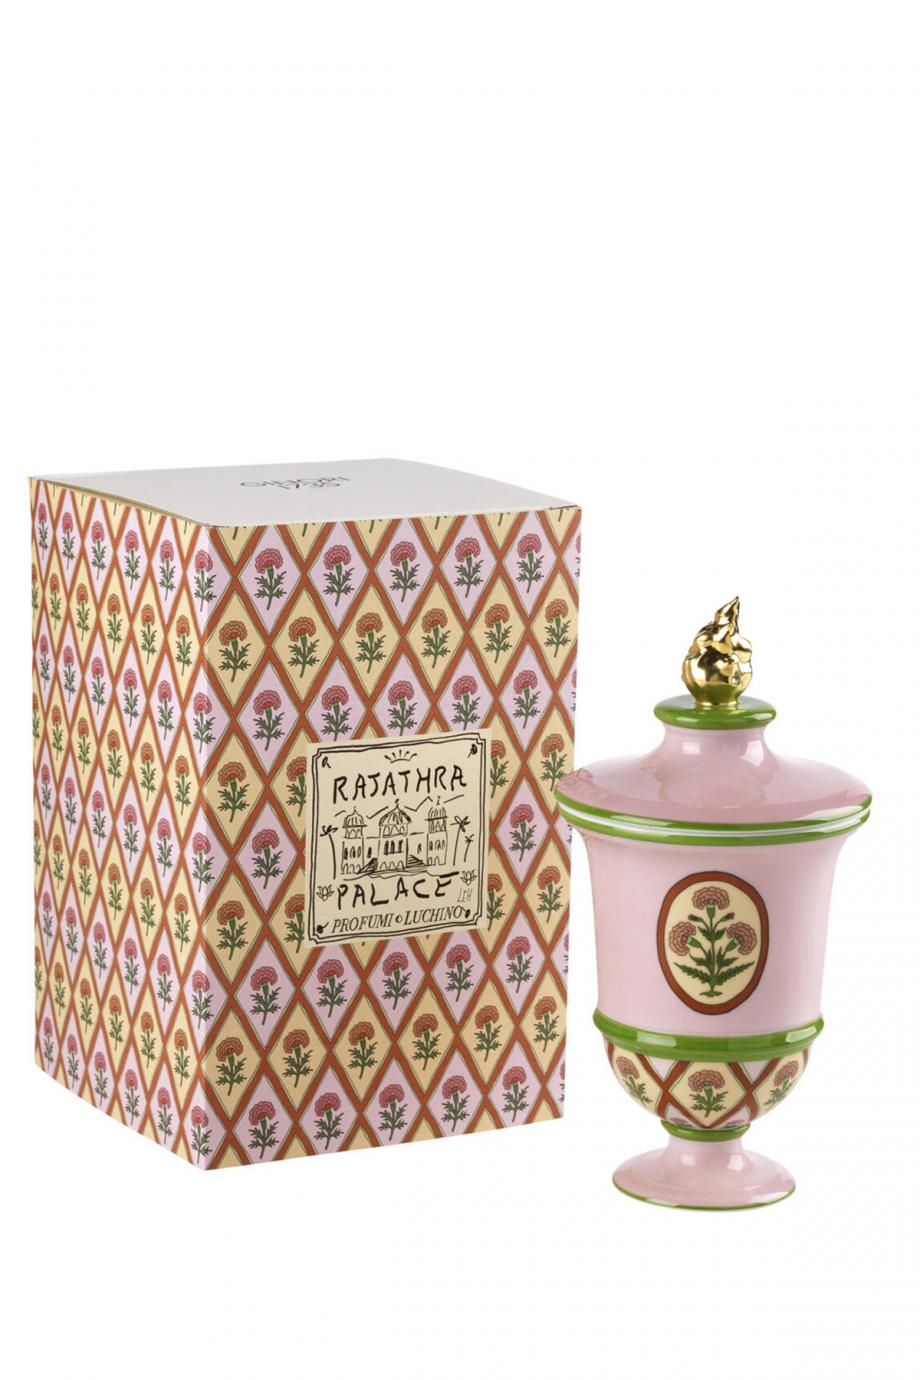 Scentend candle Anfora Rajathra Palace 490gr